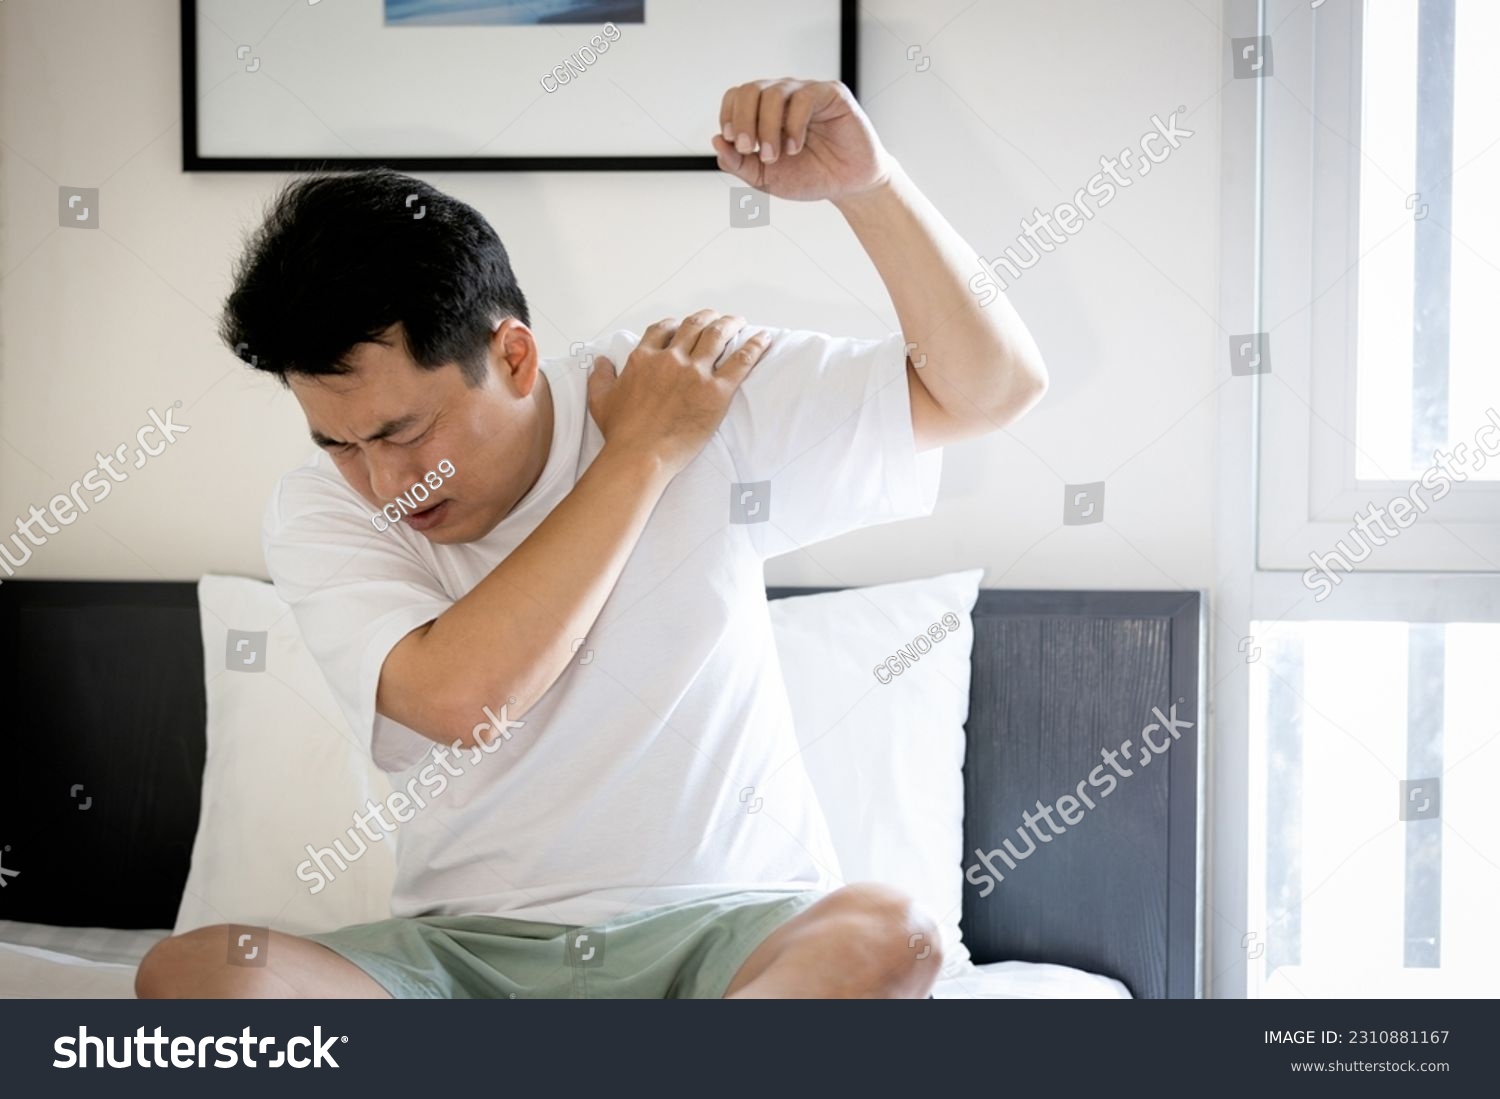 Asian middle aged man suffering from frozen shoulder,pain and stiffness,unable to move,difficulty lifting his arm,male people with calcific tendonitis or shoulder injuries,health care,medical concept #2310881167